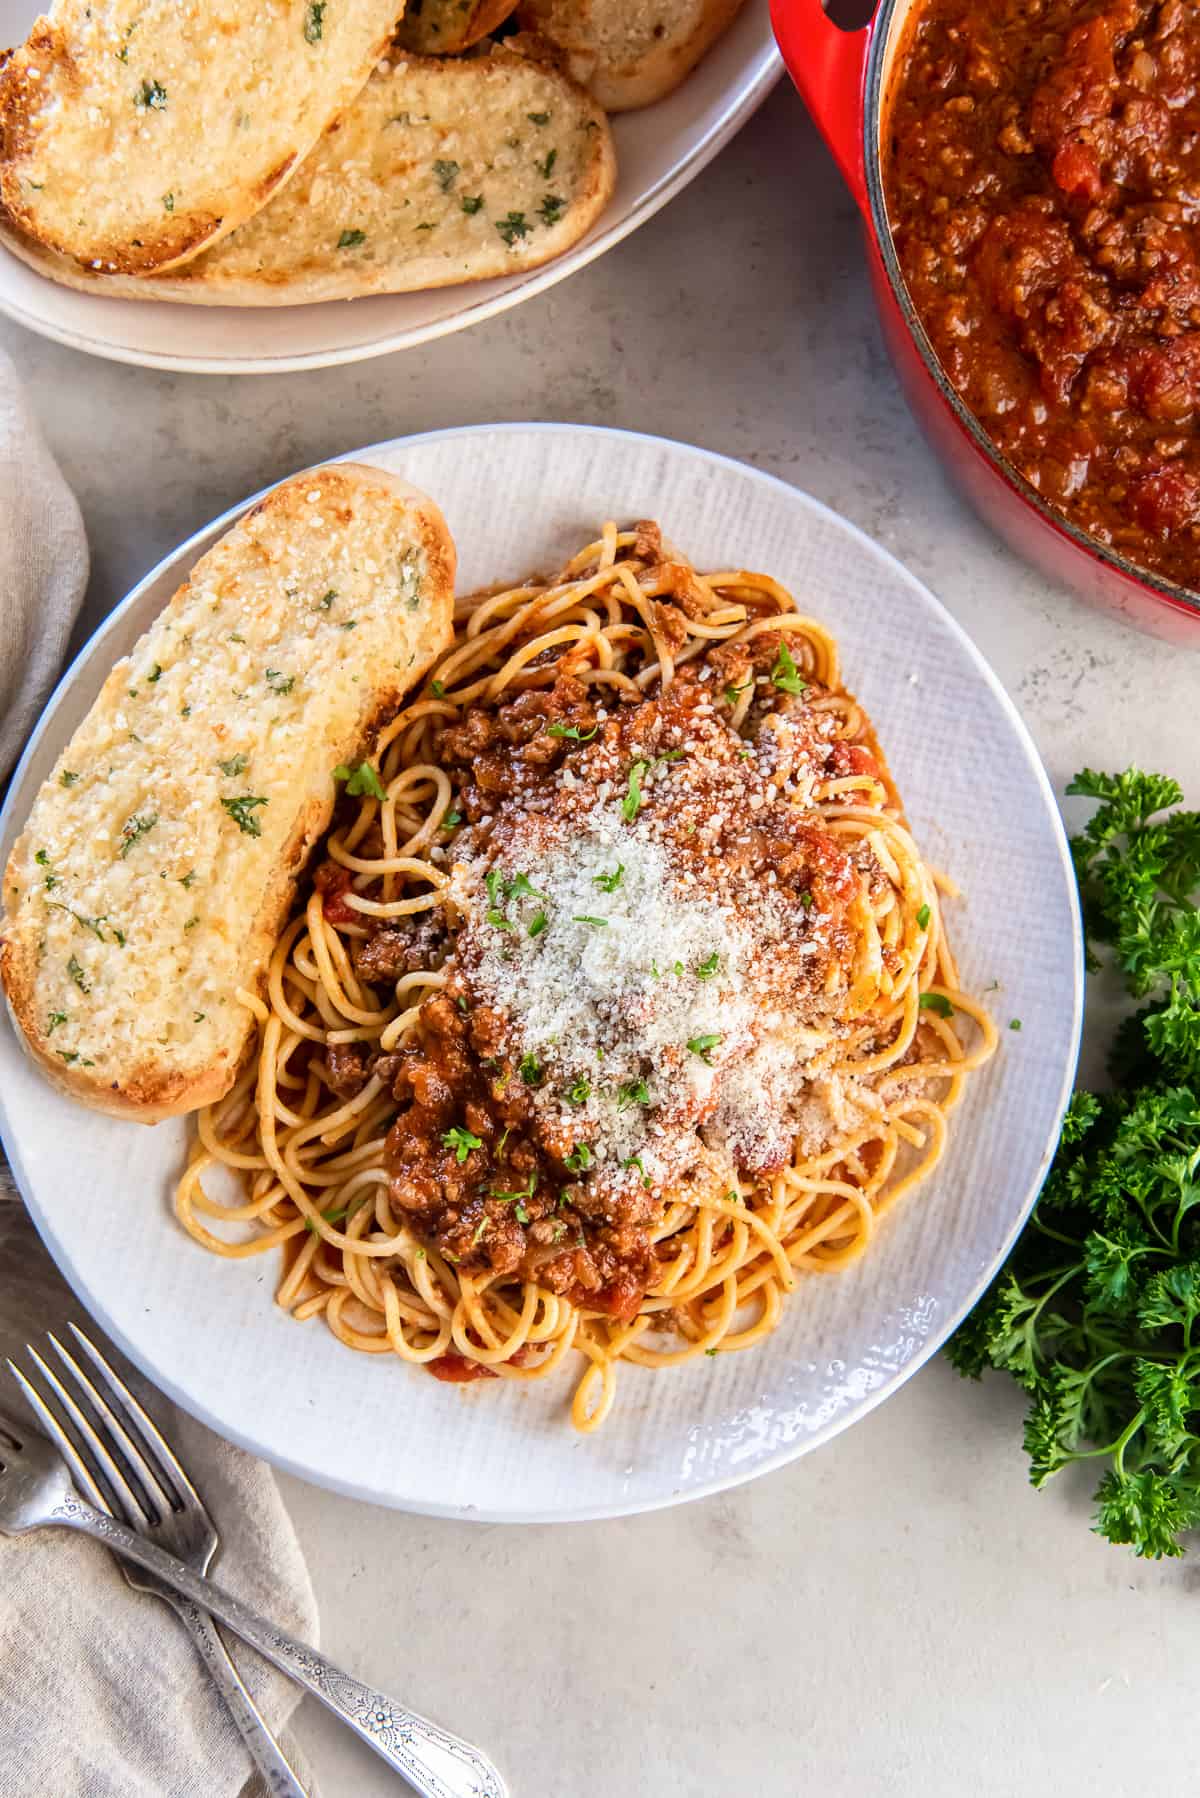 A top down shot of a plate of spaghetti topped with Parmesan cheese on a plate with garlic bread.